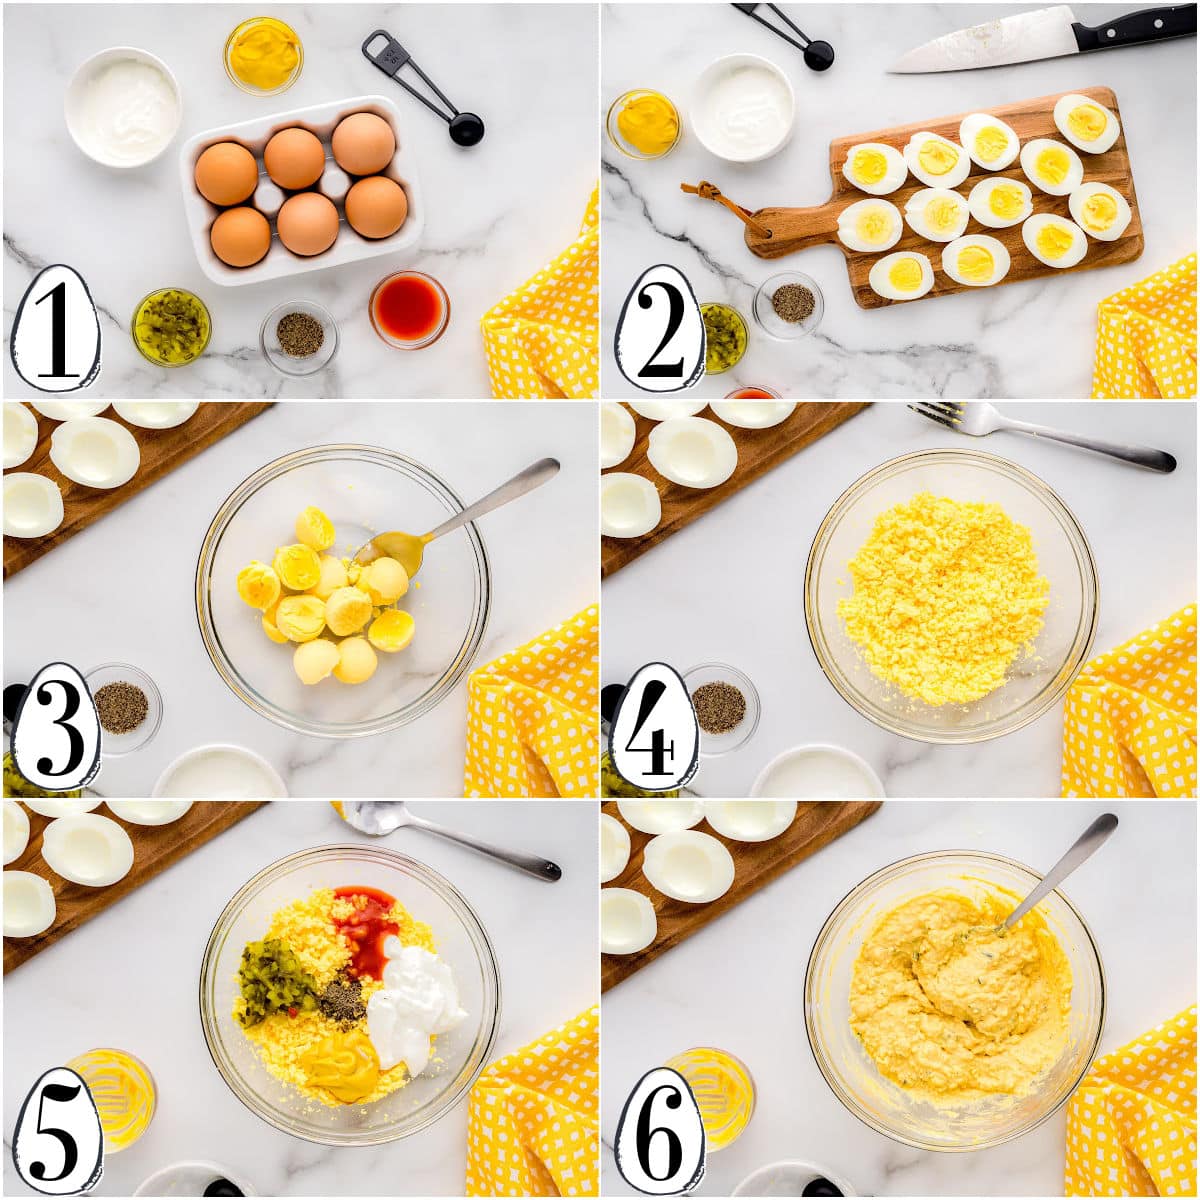 six image collage showing step by step how to make deviled eggs.